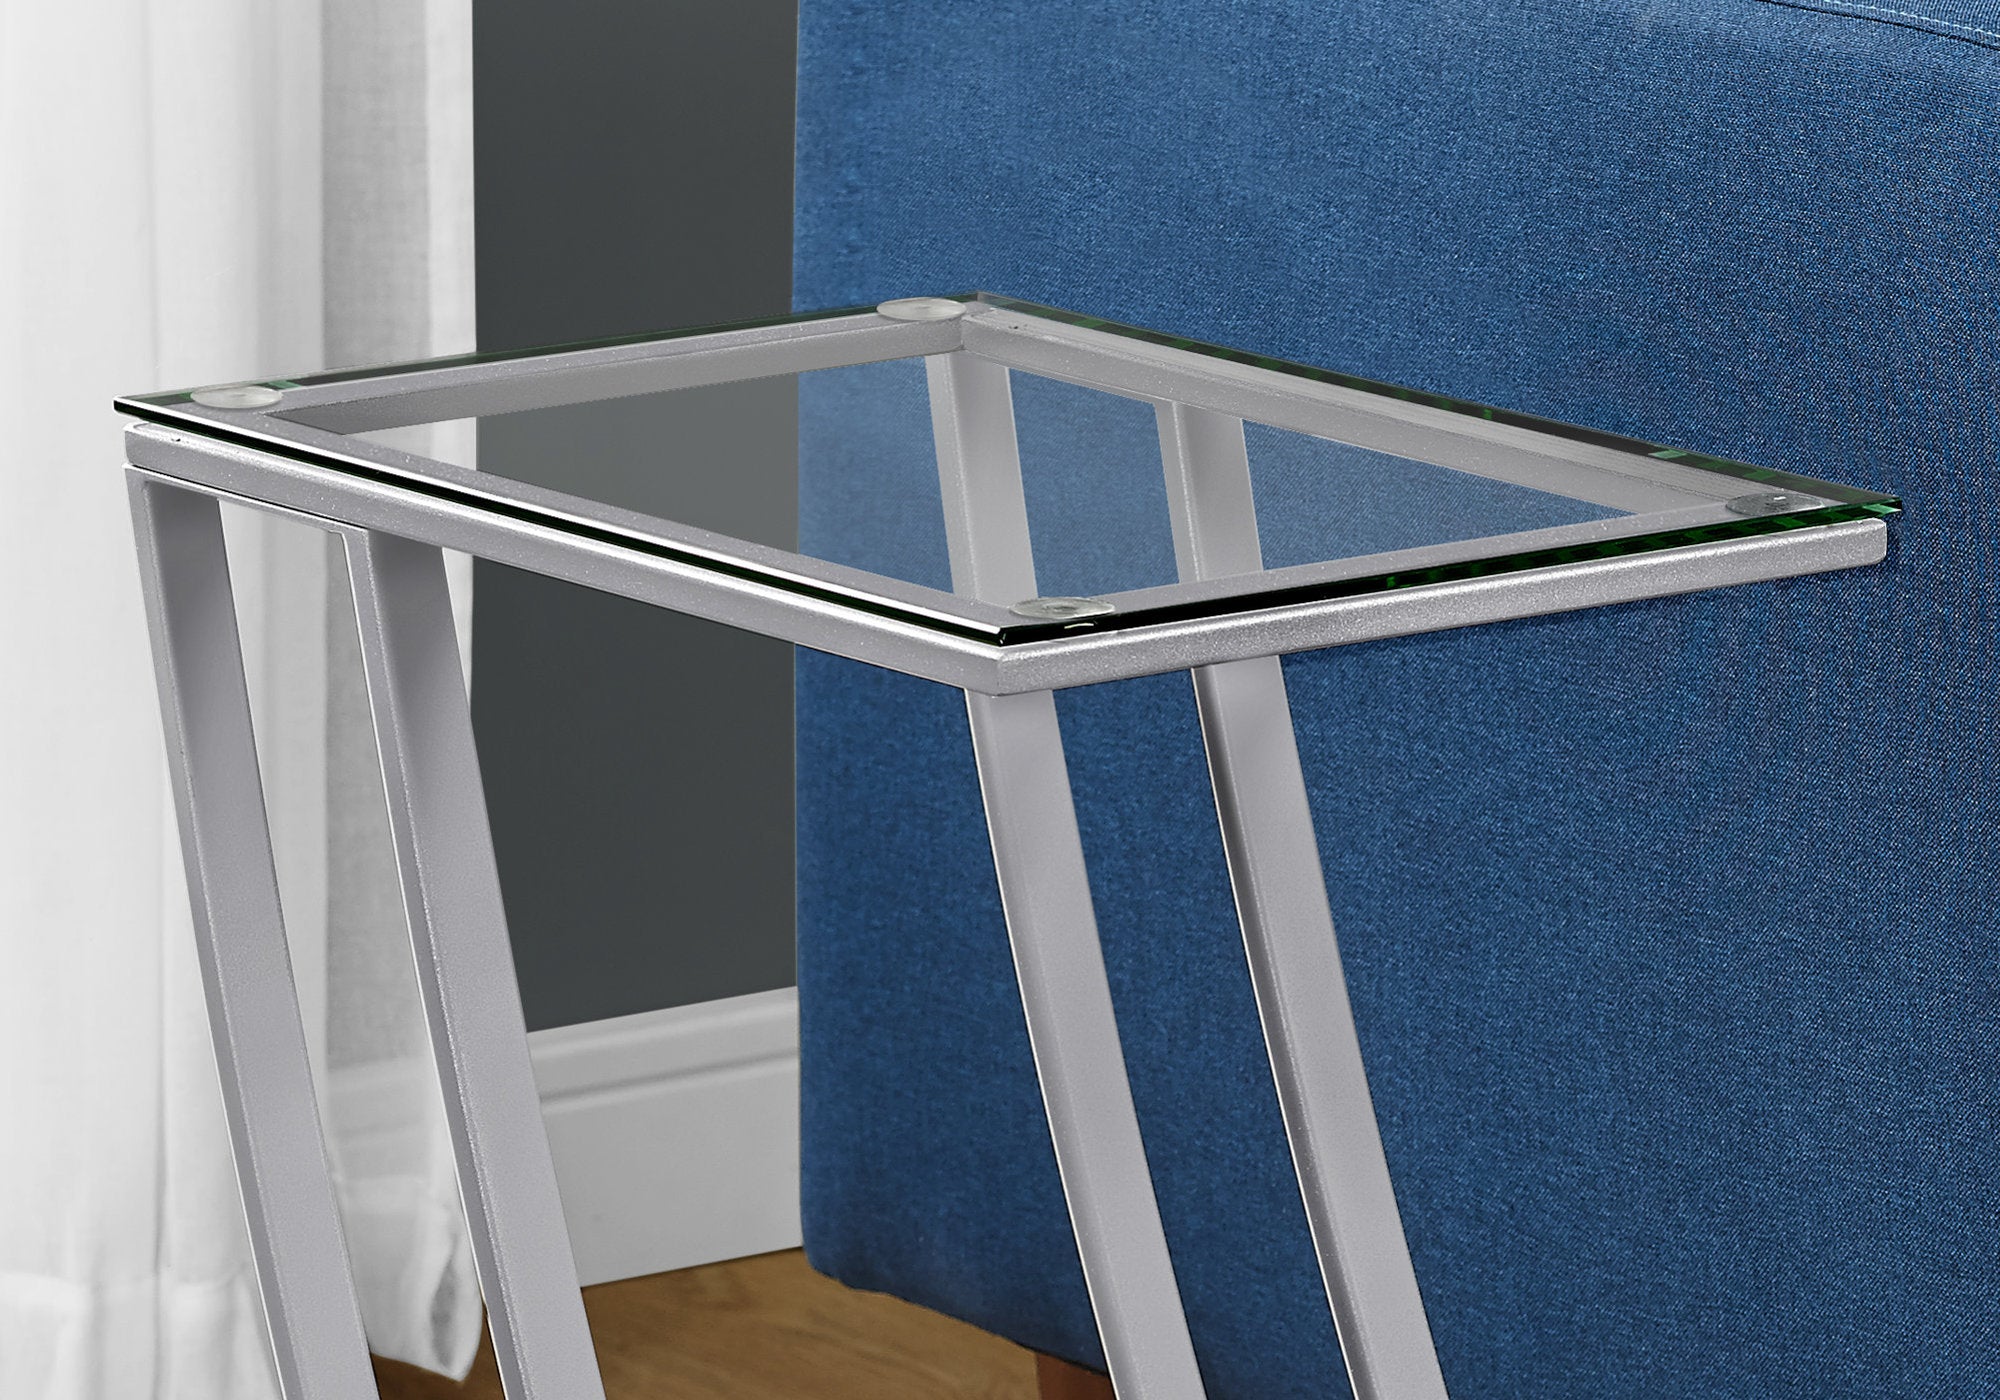 Accent Table - Silver Metal With Tempered Glass